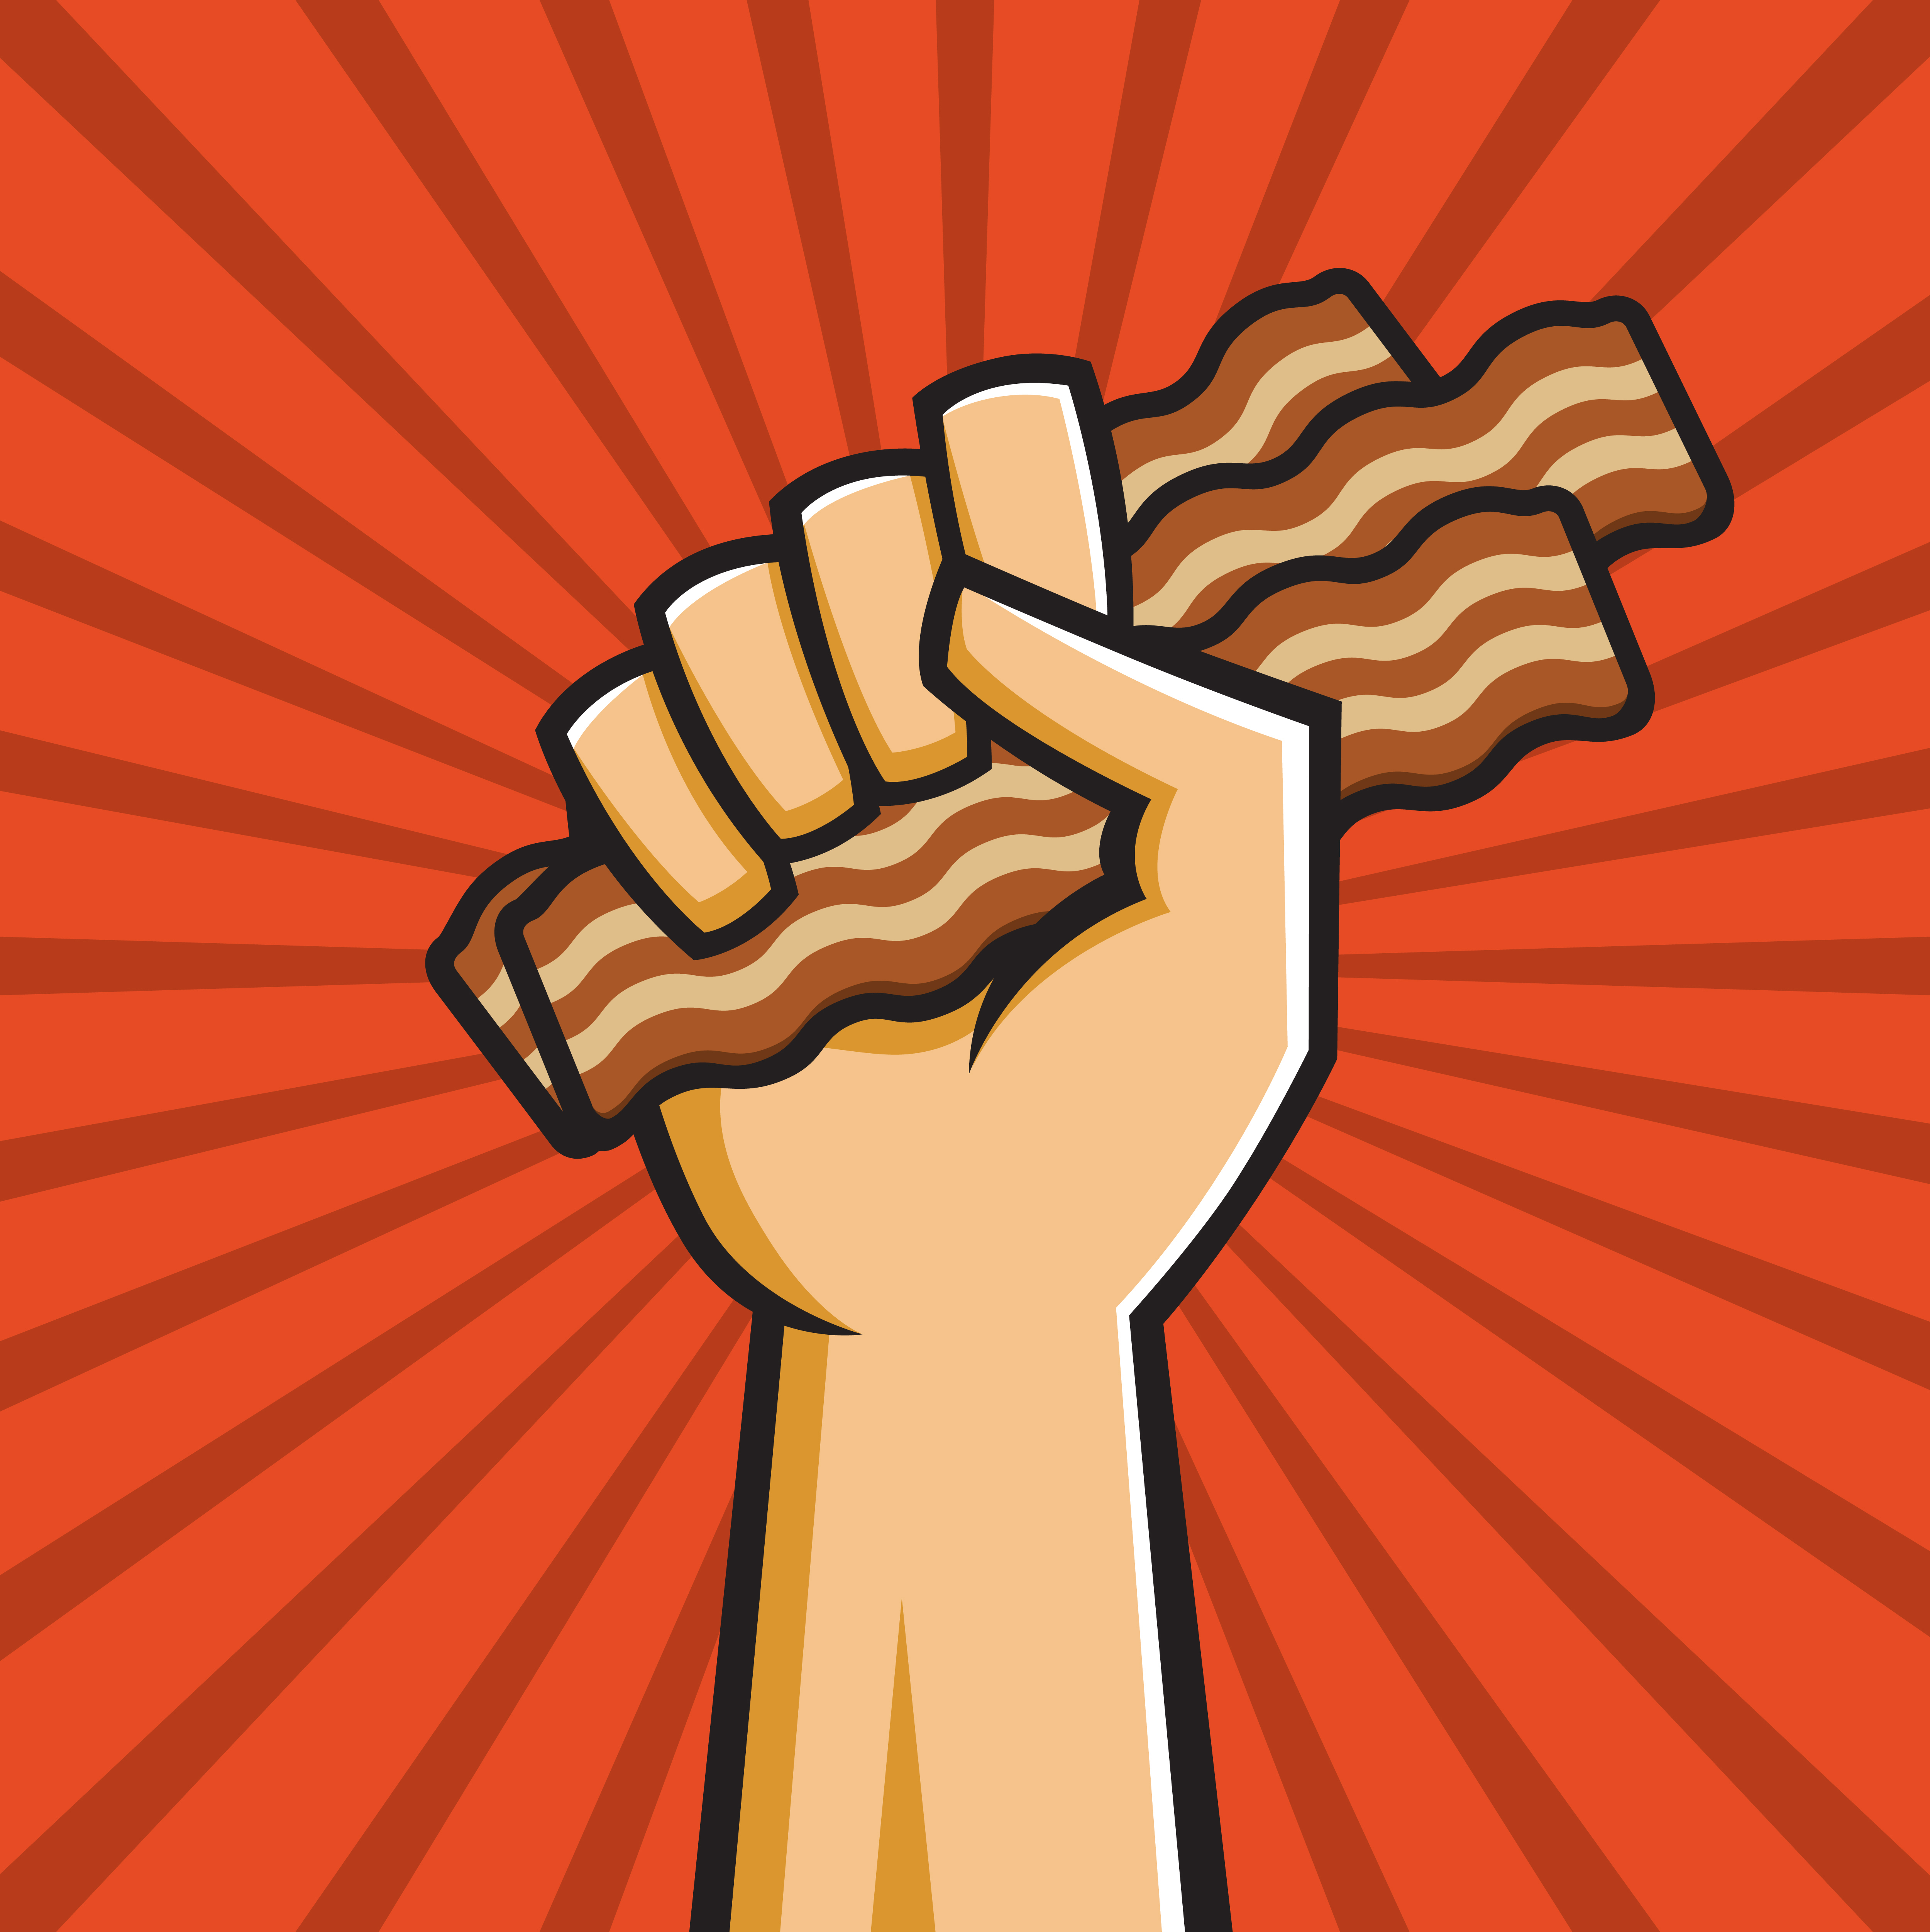 See More News From The Blue Ribbon Bacon Festival At Salon